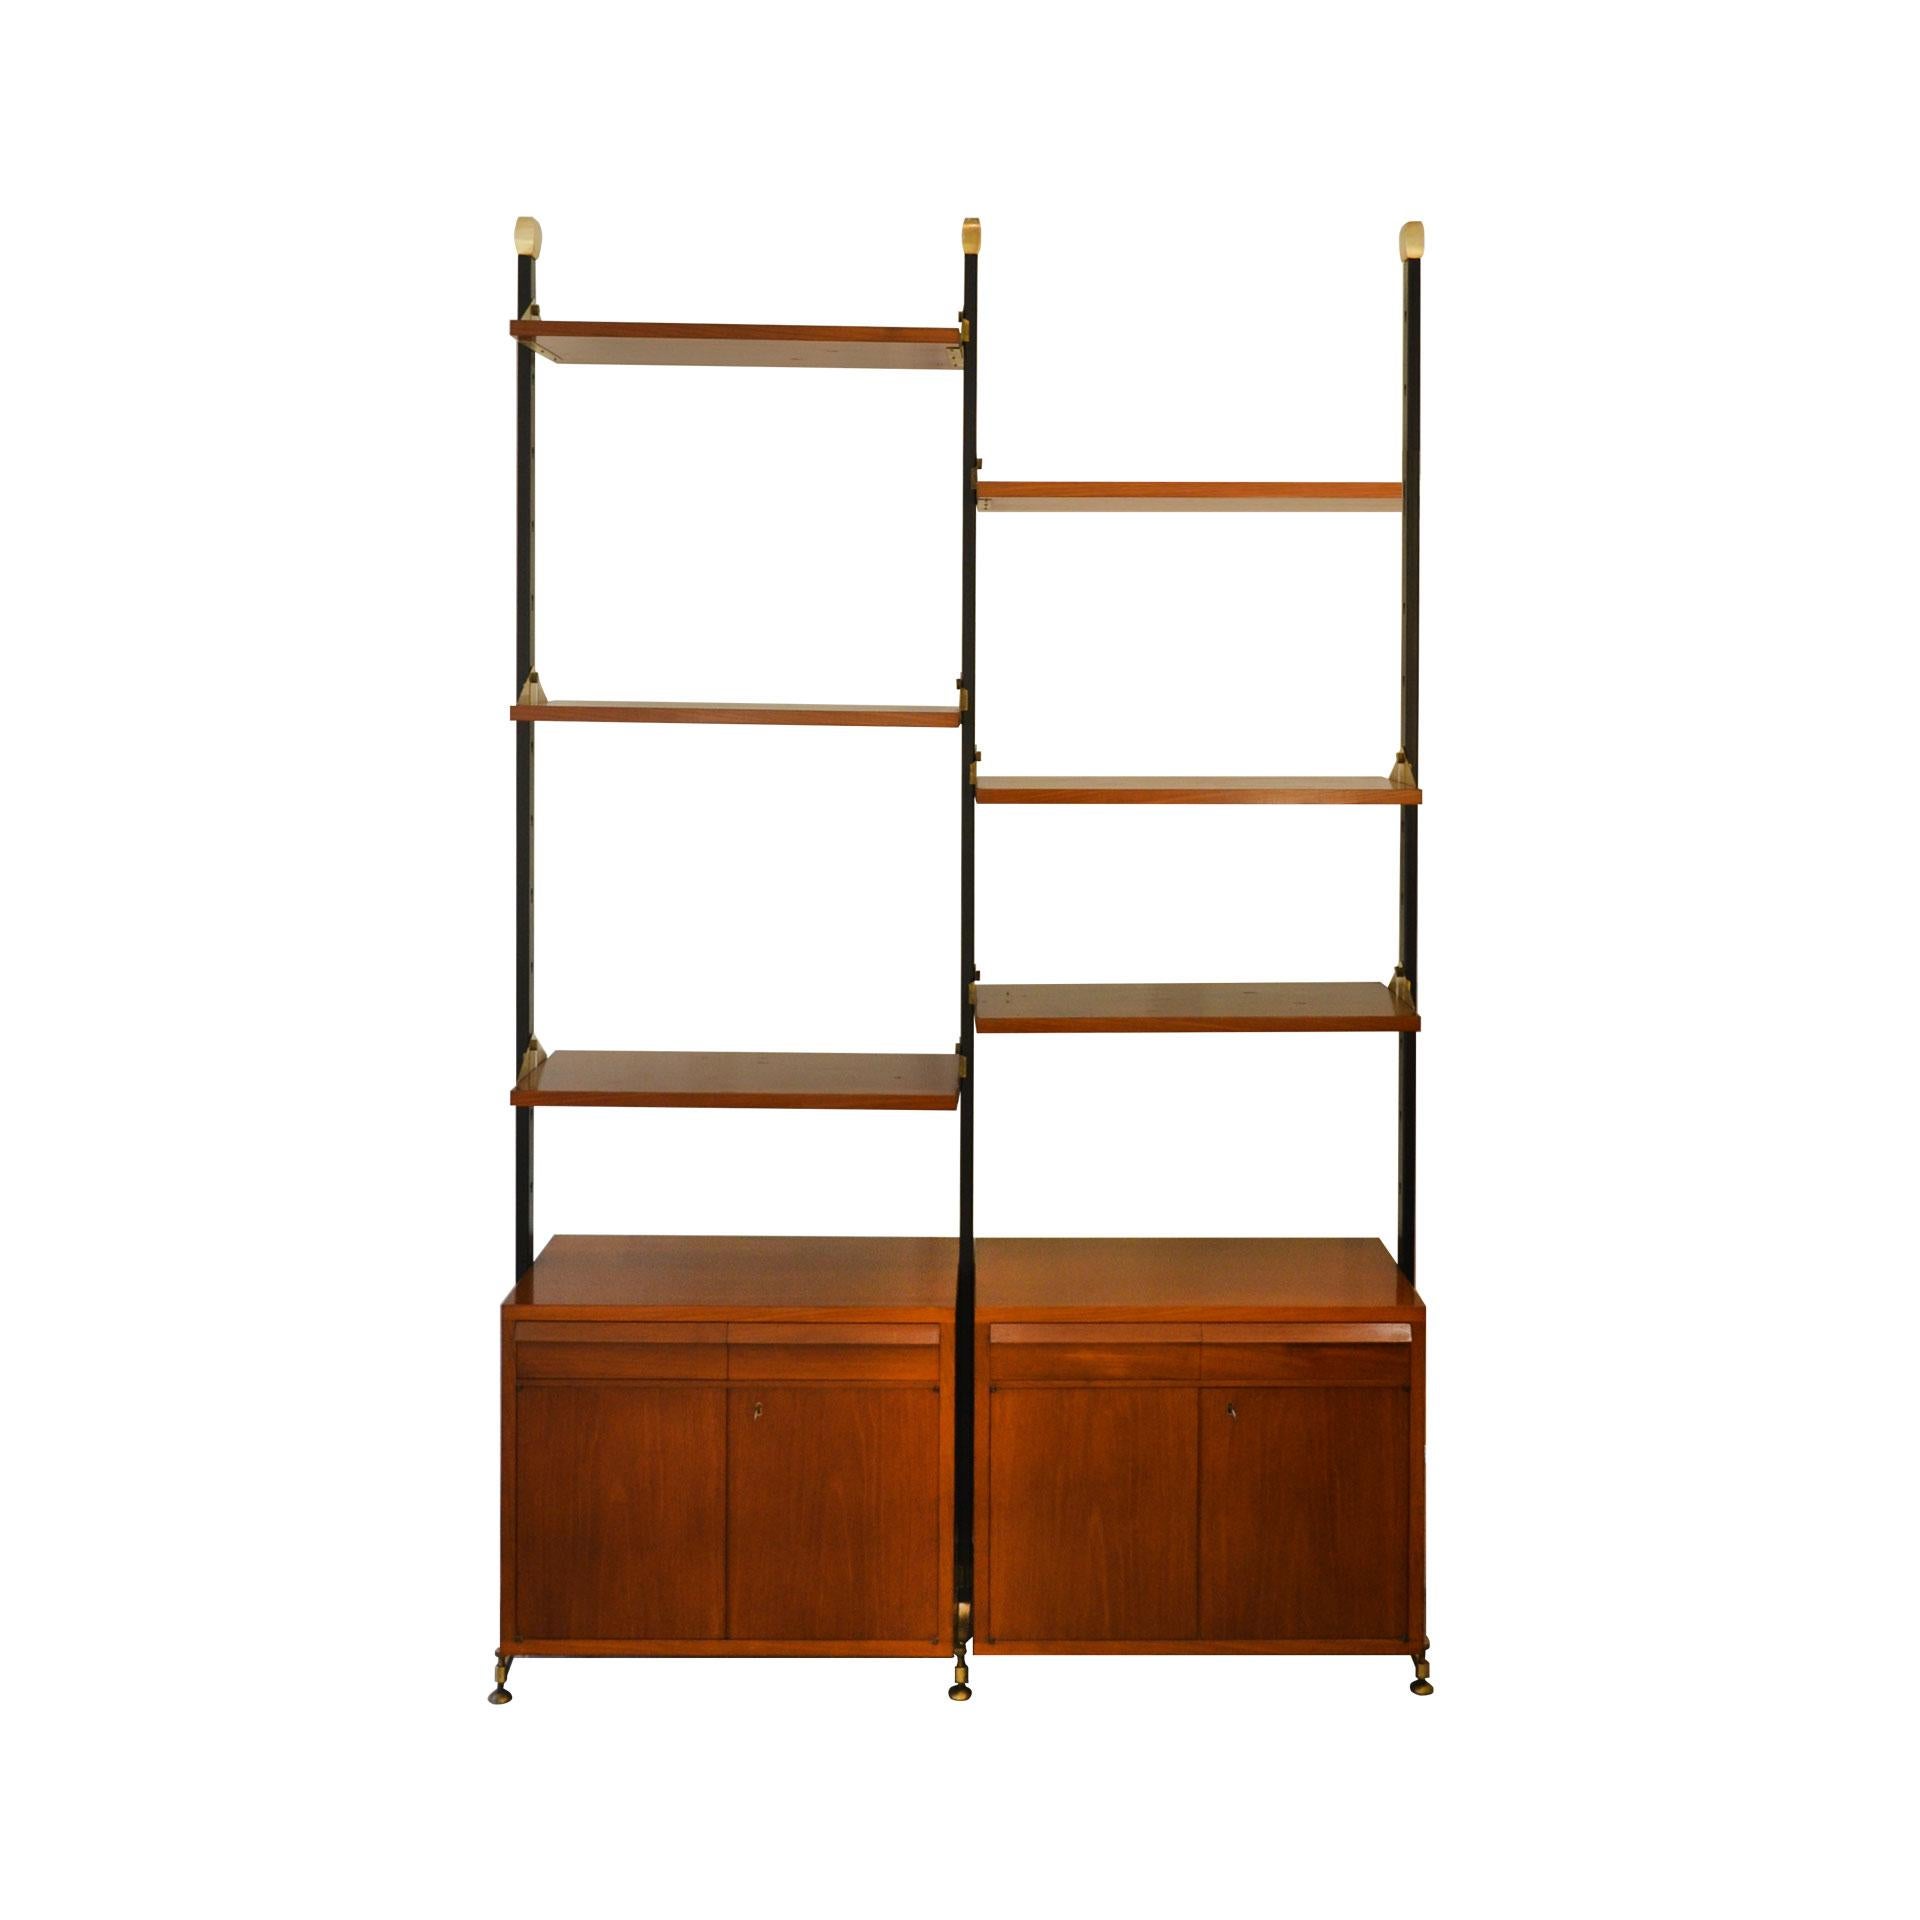 Bookcase with shelves and cabinets in wood and brass designed in 1950s, in the style of the Italian School. The bookcase has six shelves that are adjustable in height. Very good condition. Restored wood surfaces.